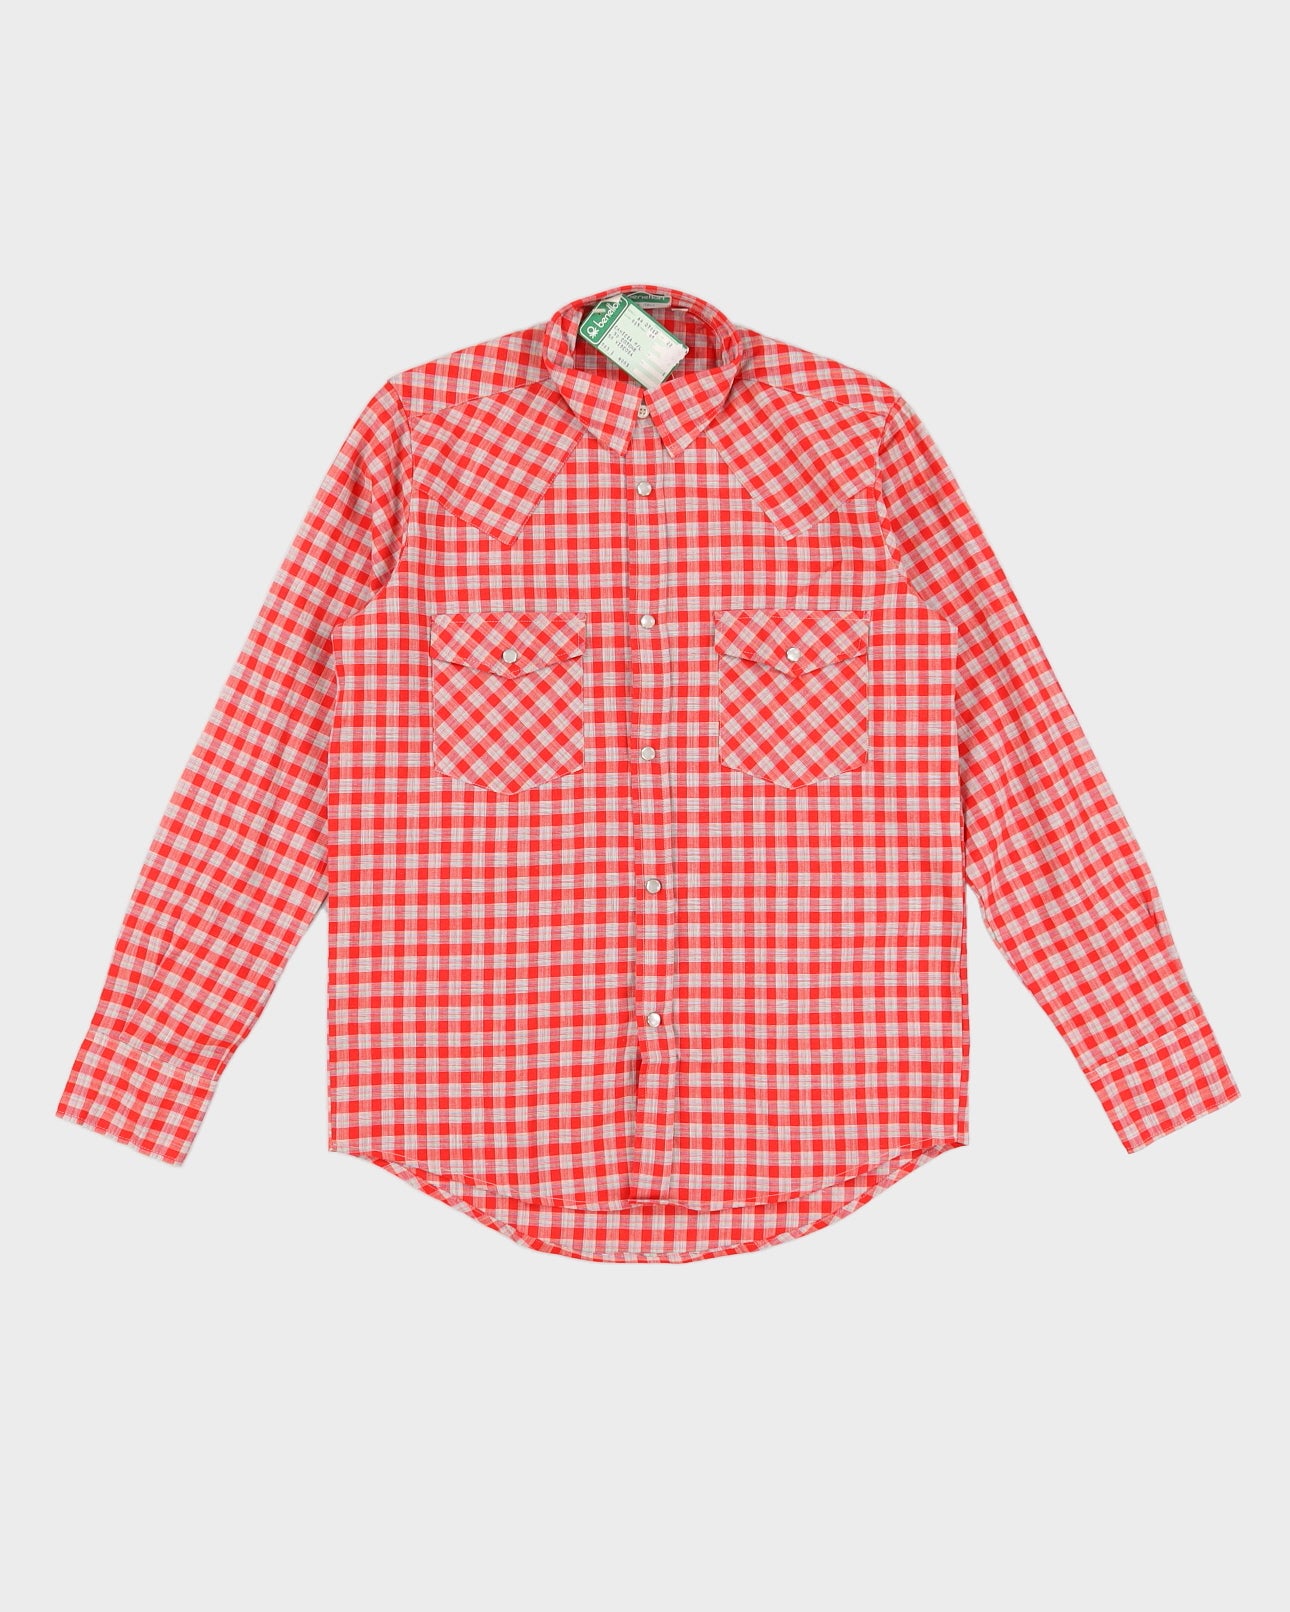 Vintage 70s Benetton Red Checked Long Sleeved Shirt Deadstock With Tags - M